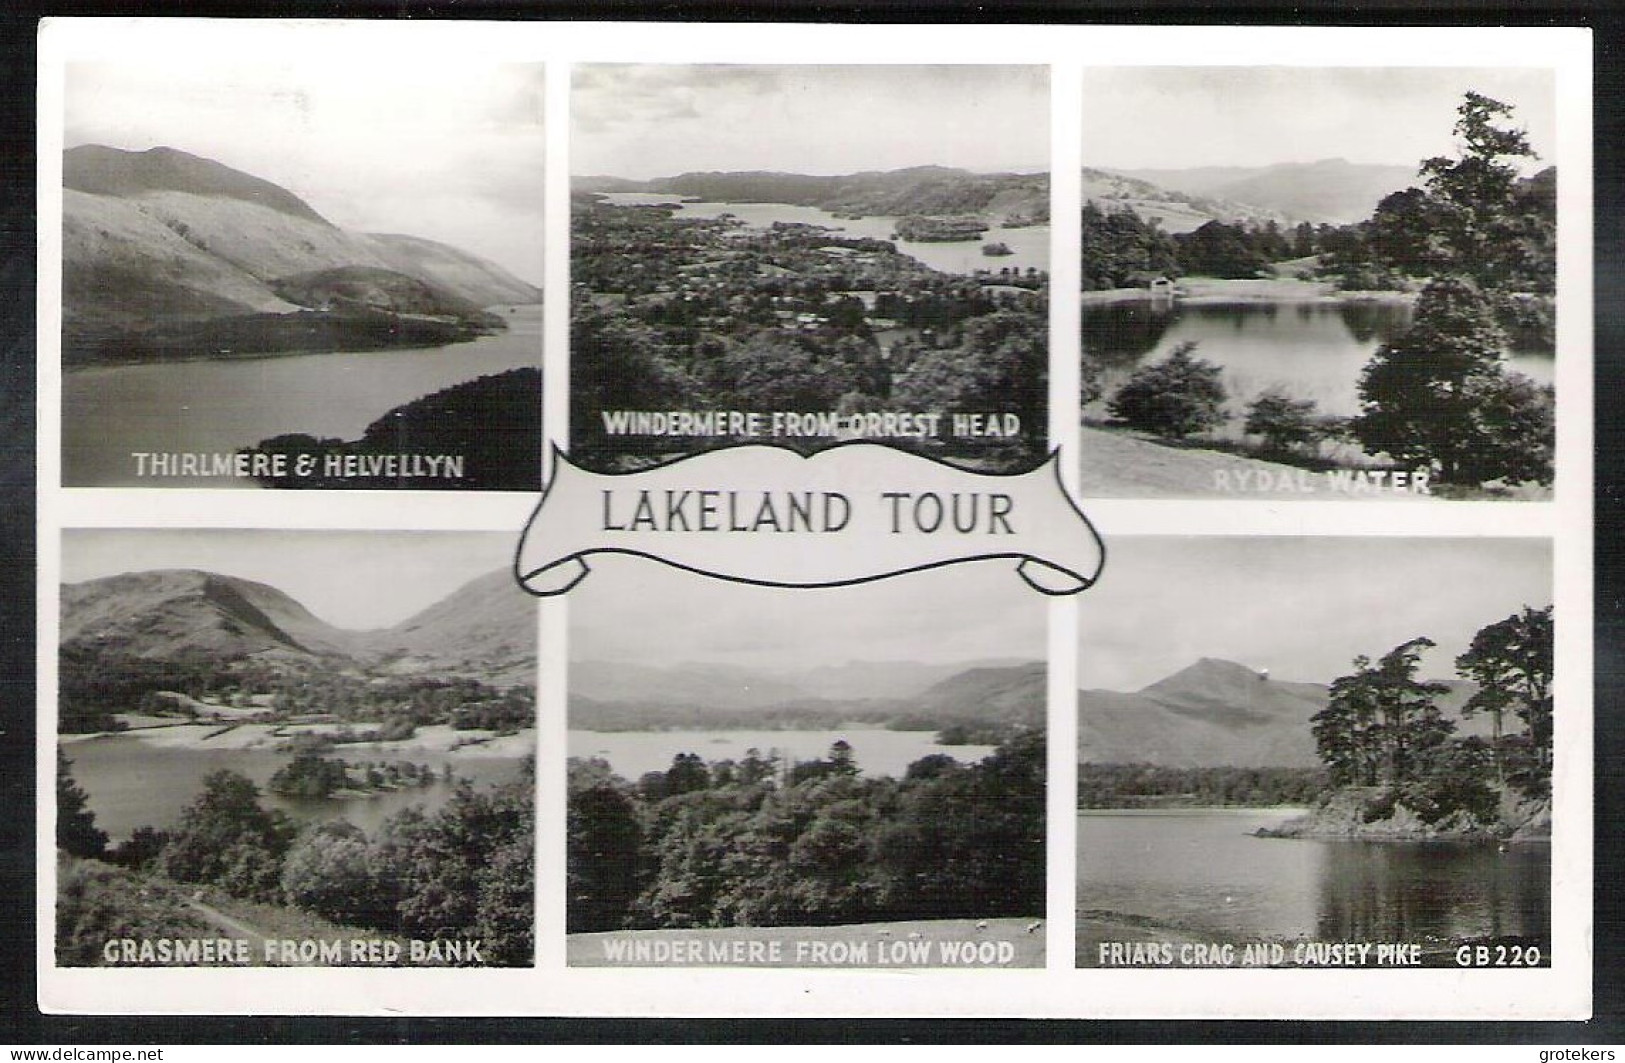 LAKELAND TOUR From WINDERMERE 1953 - Windermere